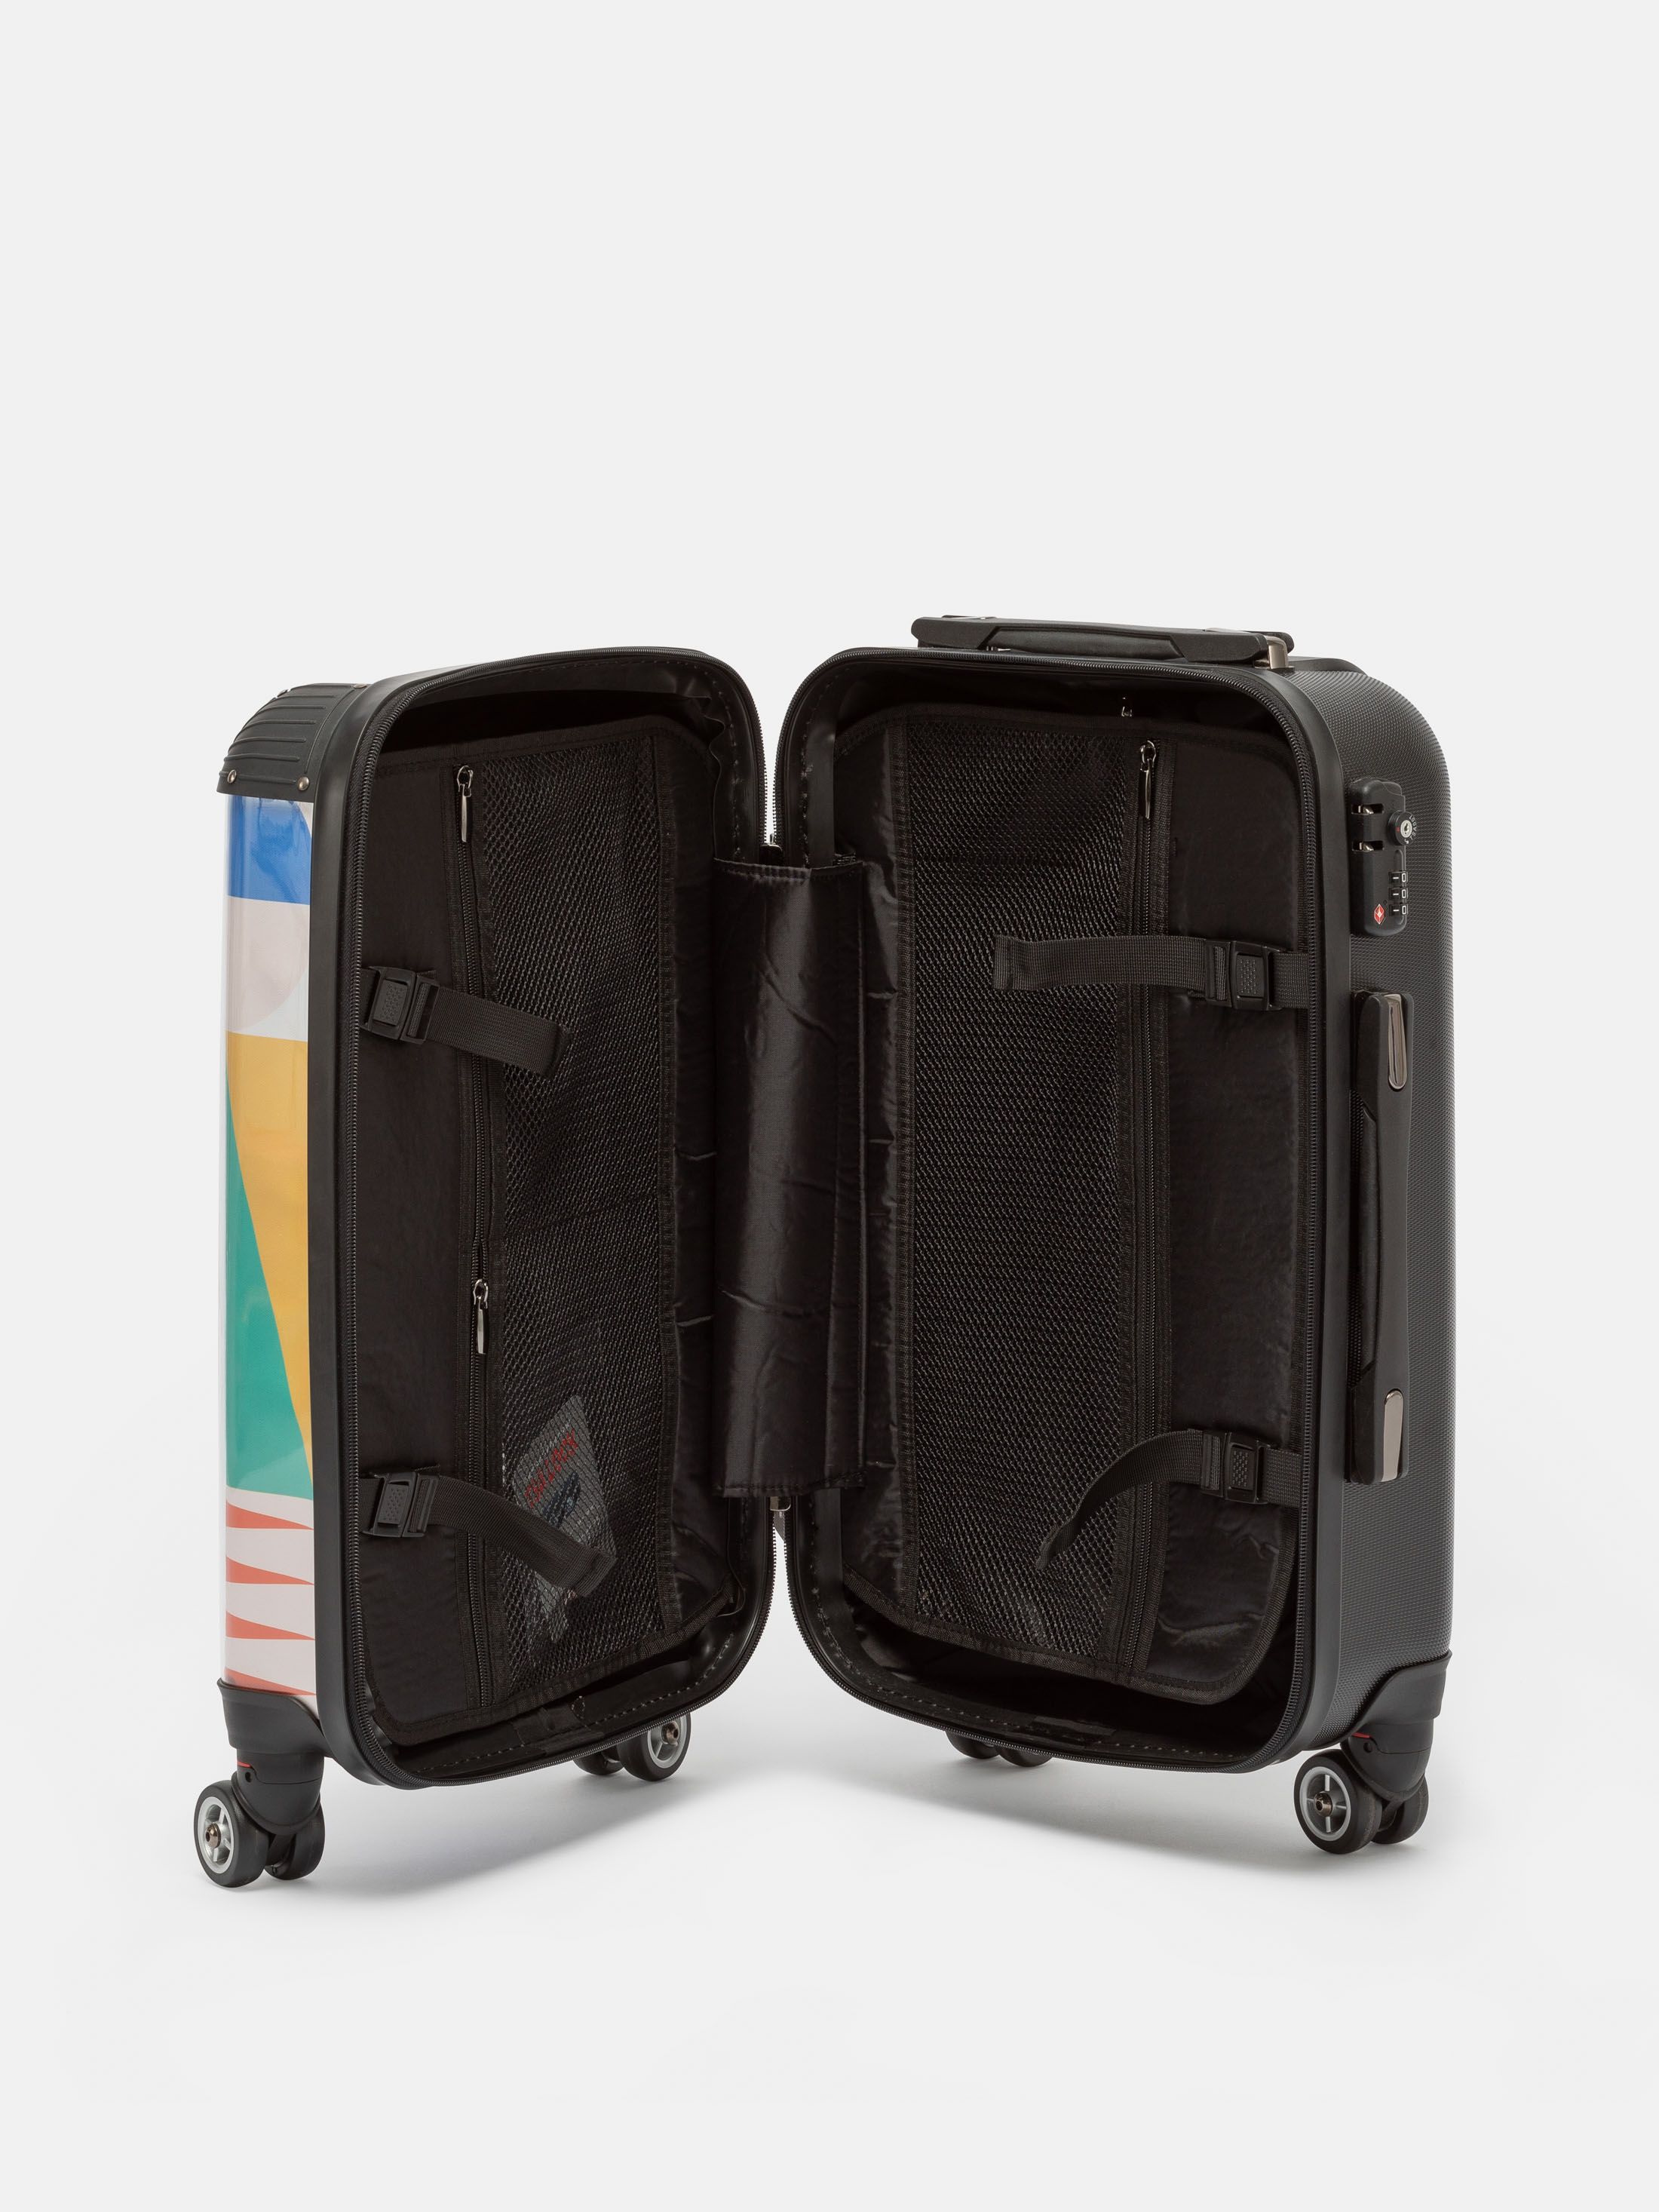 design your own suitcase uk